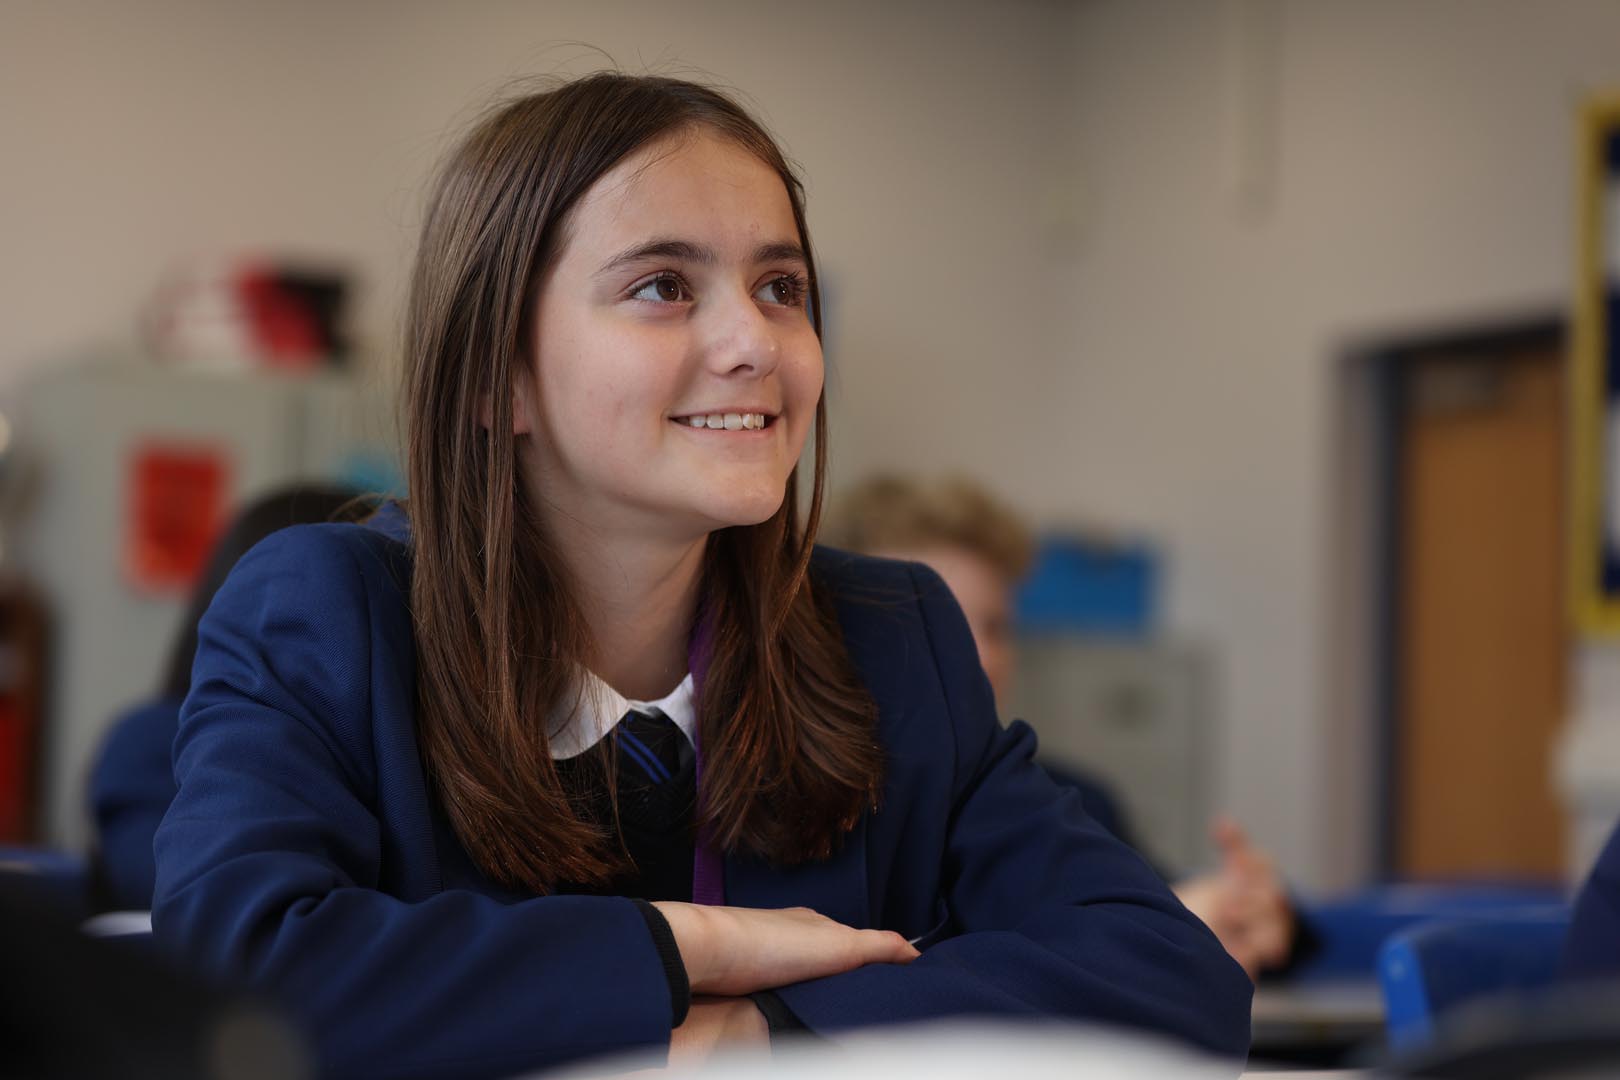 “The school is everything you would want a school to be. The teachers are thoughtful, the pupils are polite and lively. You are pushed to your potential and stretched and encouraged to thrive.”